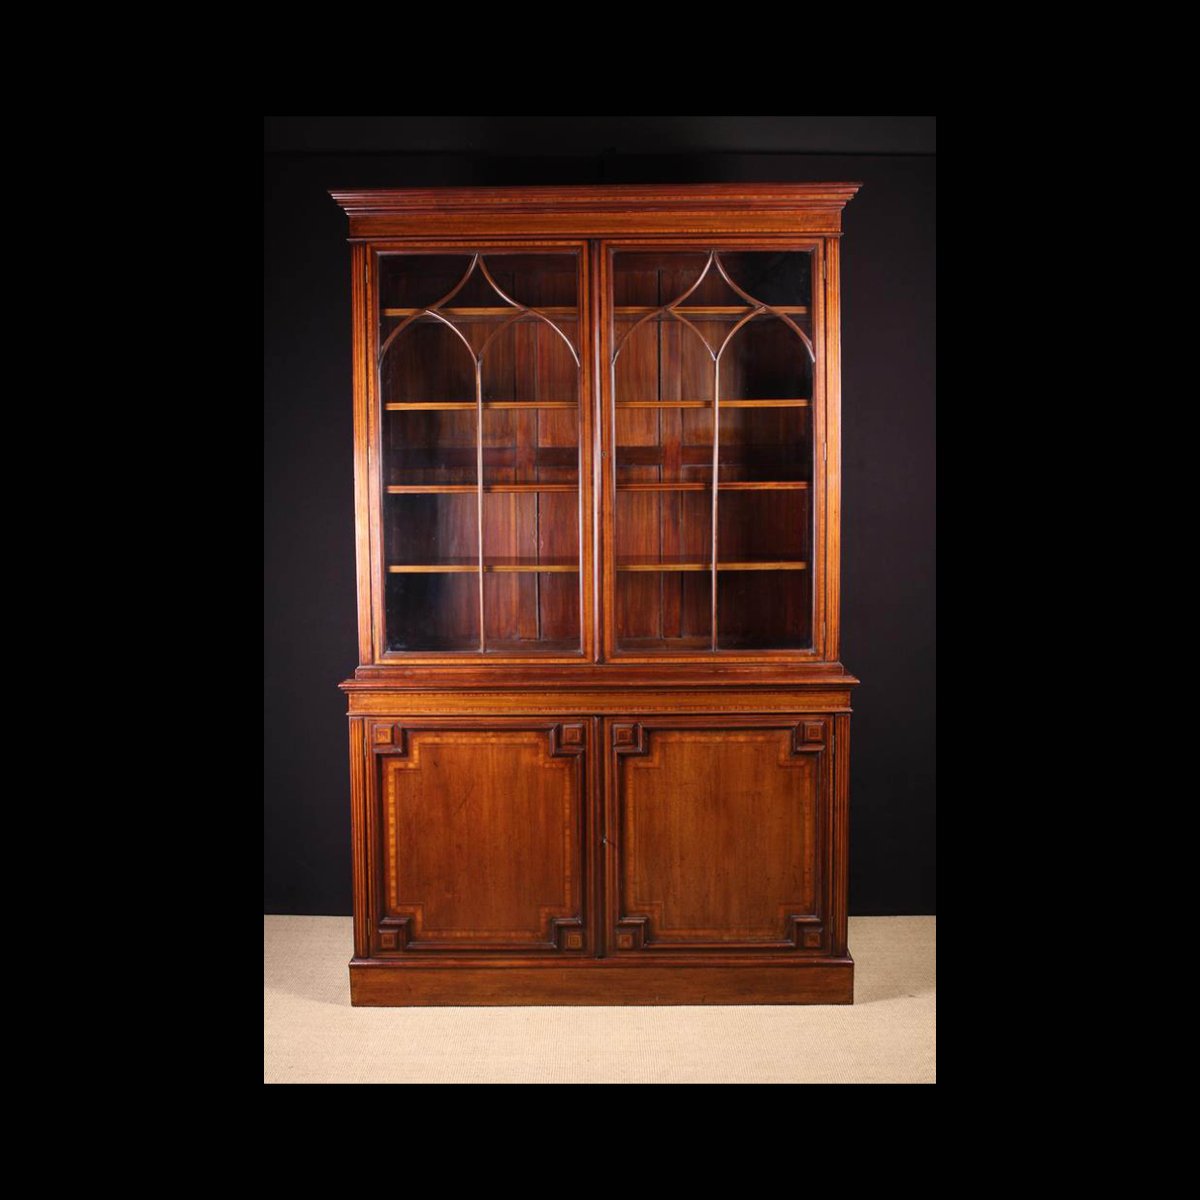 A Handsome Late 19th Century Inlaid Mahogany Bookcase inlaid with satinwood cross-banding edged with stringing. Lot 450. Viewing days Thurs 18th and Fri 19th 10-4pm. Viewing sale days 9-11am and by private app. #auction #onlineauction #auctionhouse #auctioneer #vintage